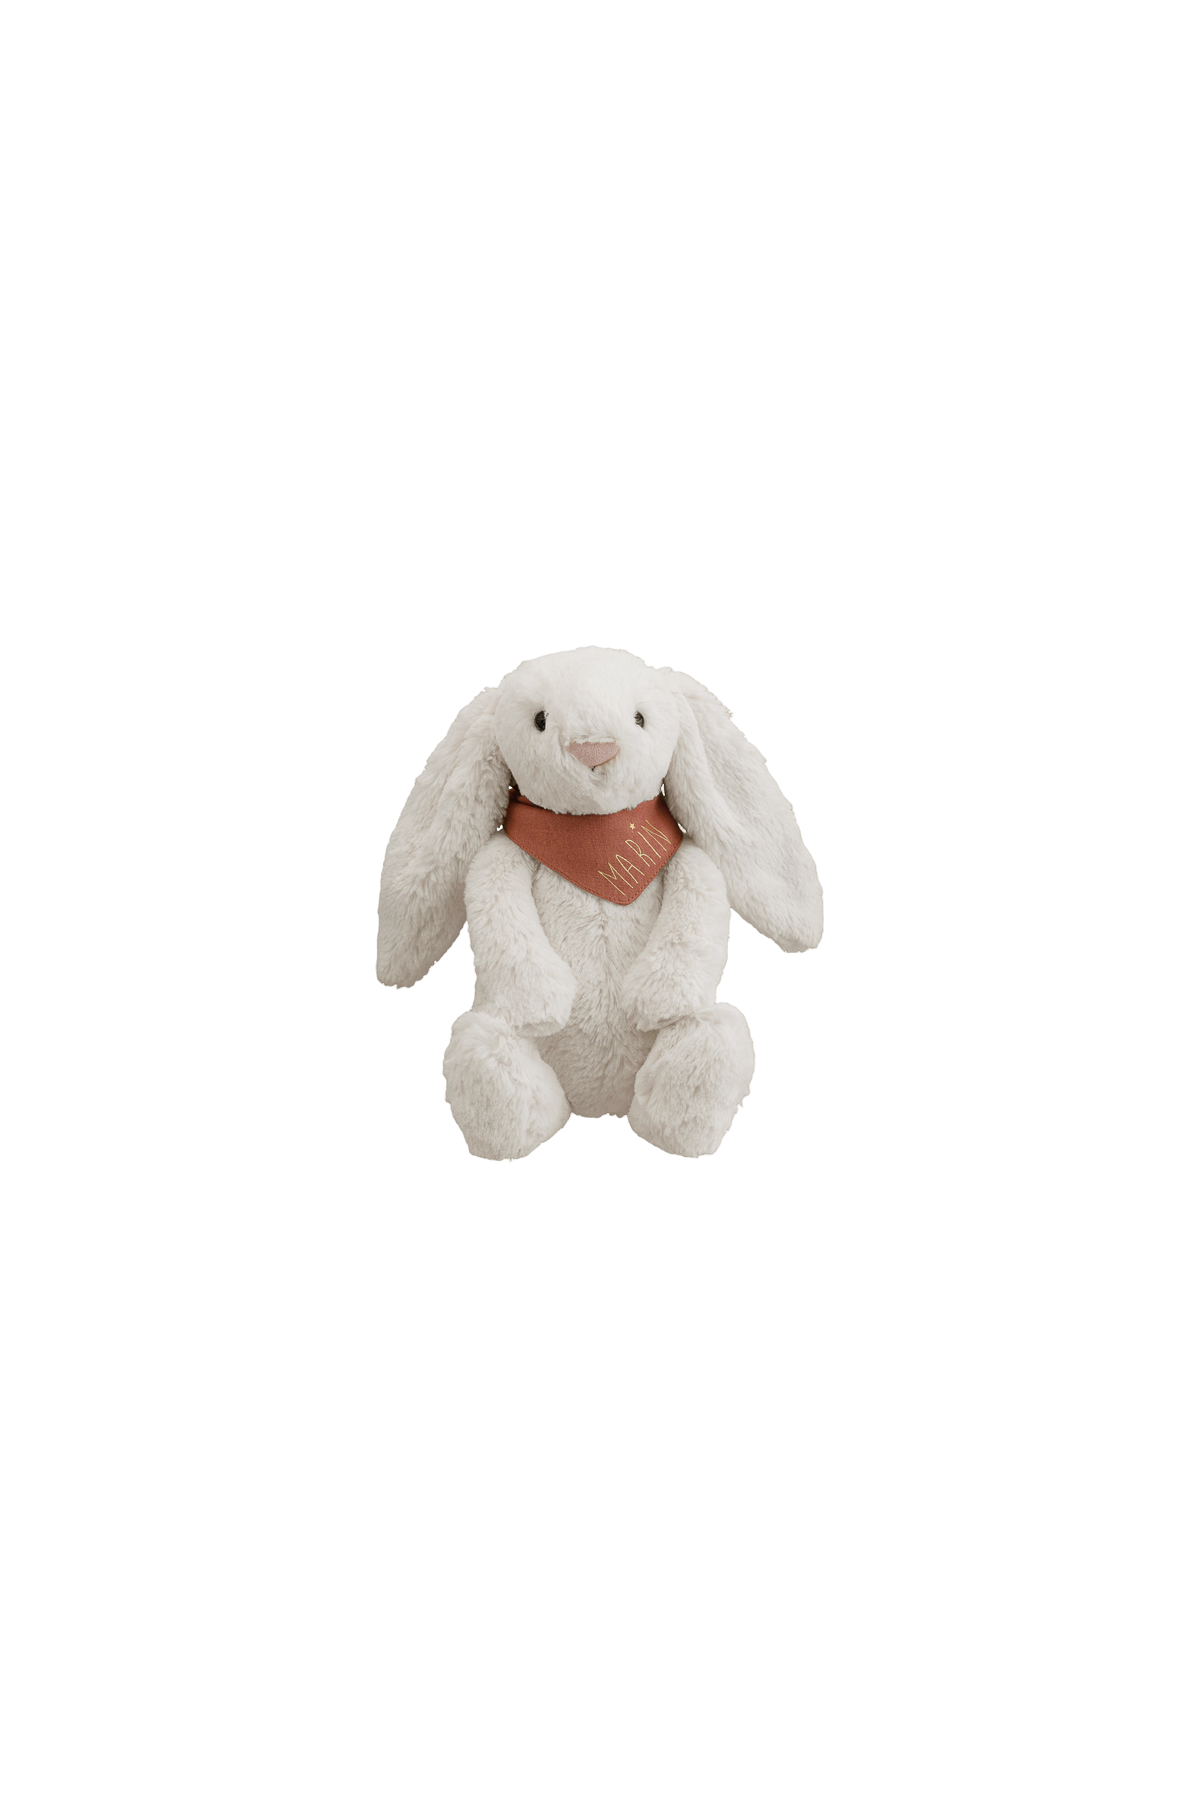  Personalised cuddly toy - Jellycat rabbit